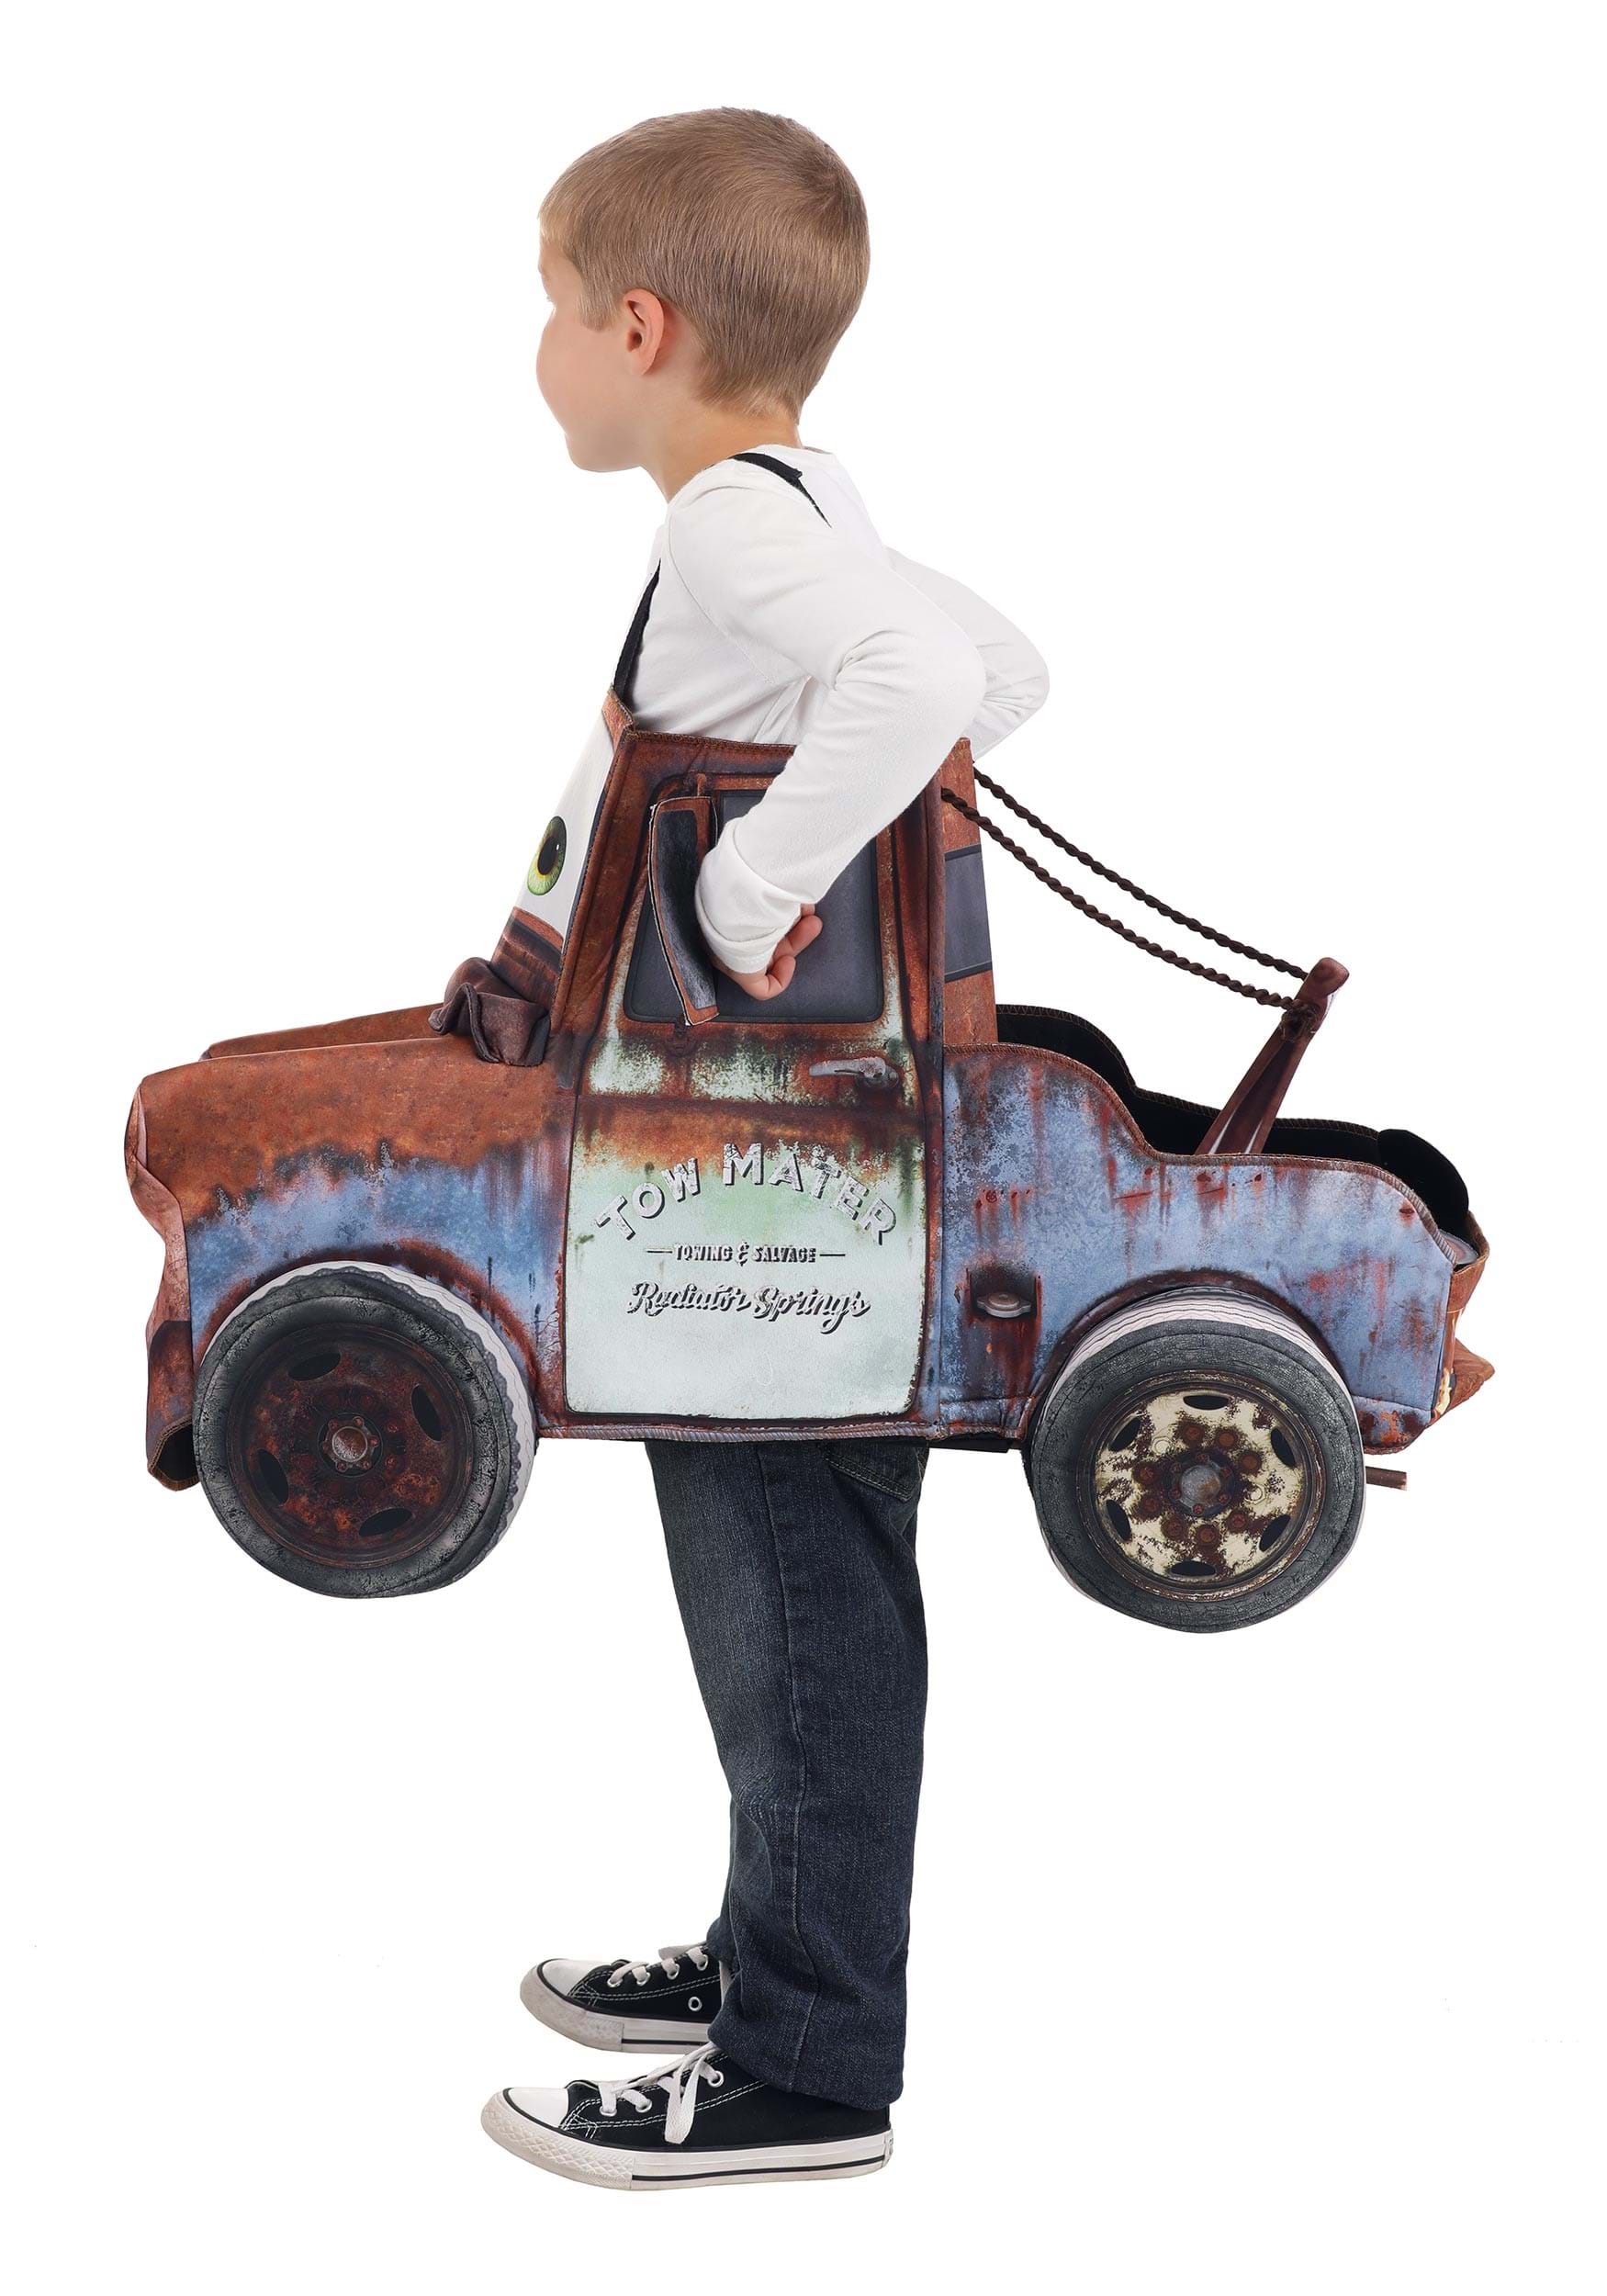 https://images.halloweencostumes.com/products/75066/2-1-296910/cars-deluxe-tow-mater-kids-costume-alt-2.jpg